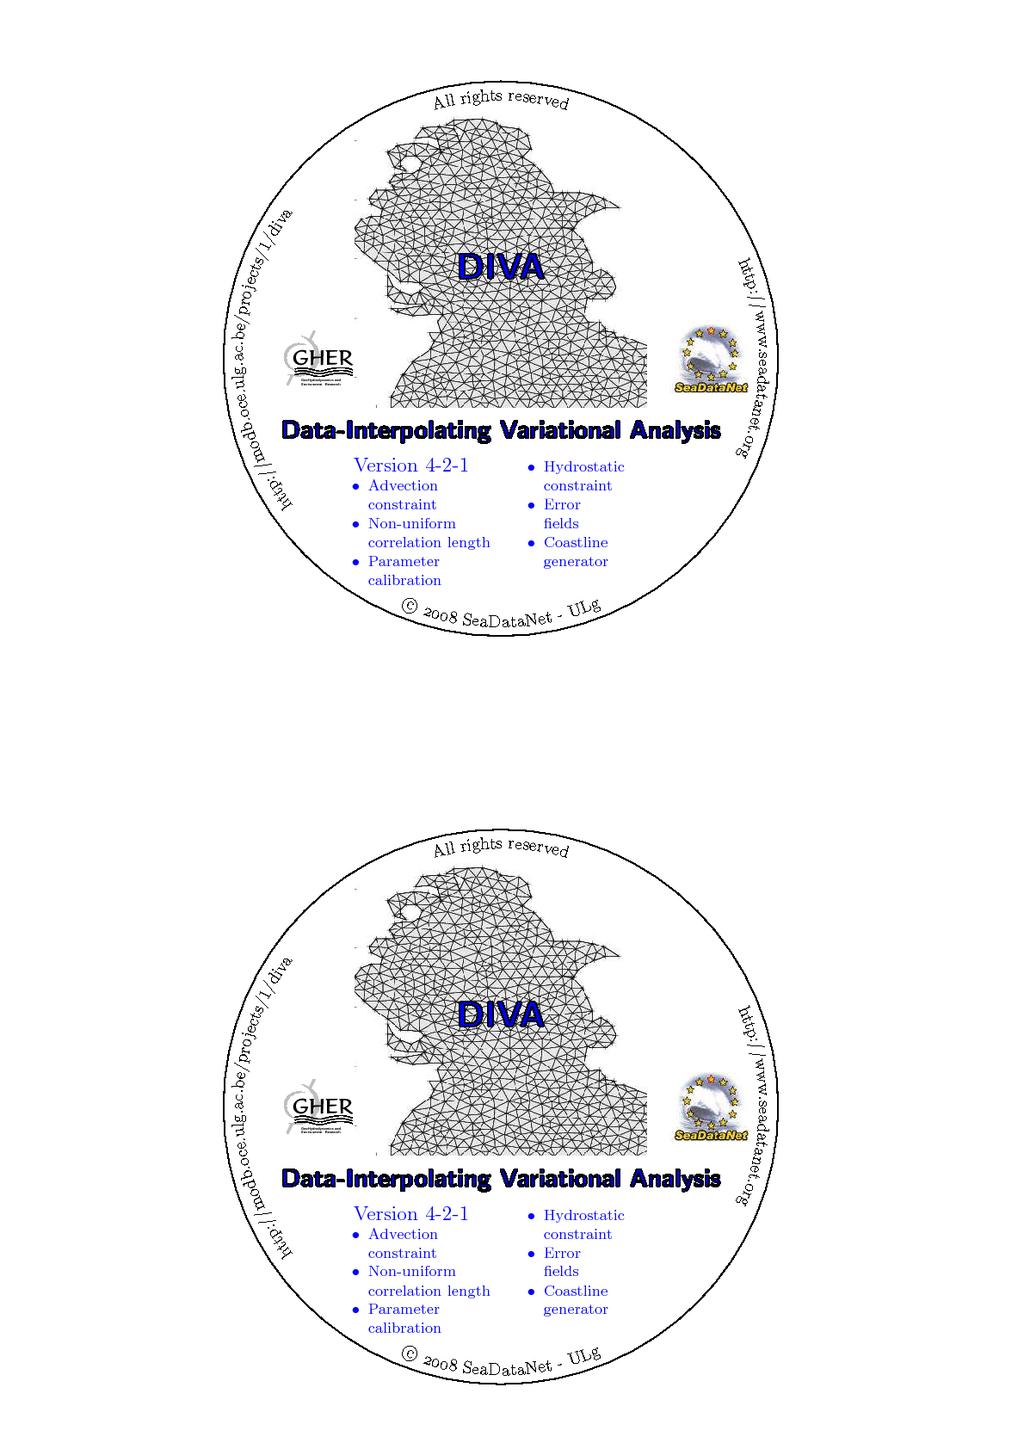 1.9.3 Diva Diva is a program written in Fortran and Shell scripts performing a variational analysis. This program is available at http://modb.oce.ulg.ac.be/modb/diva.html.